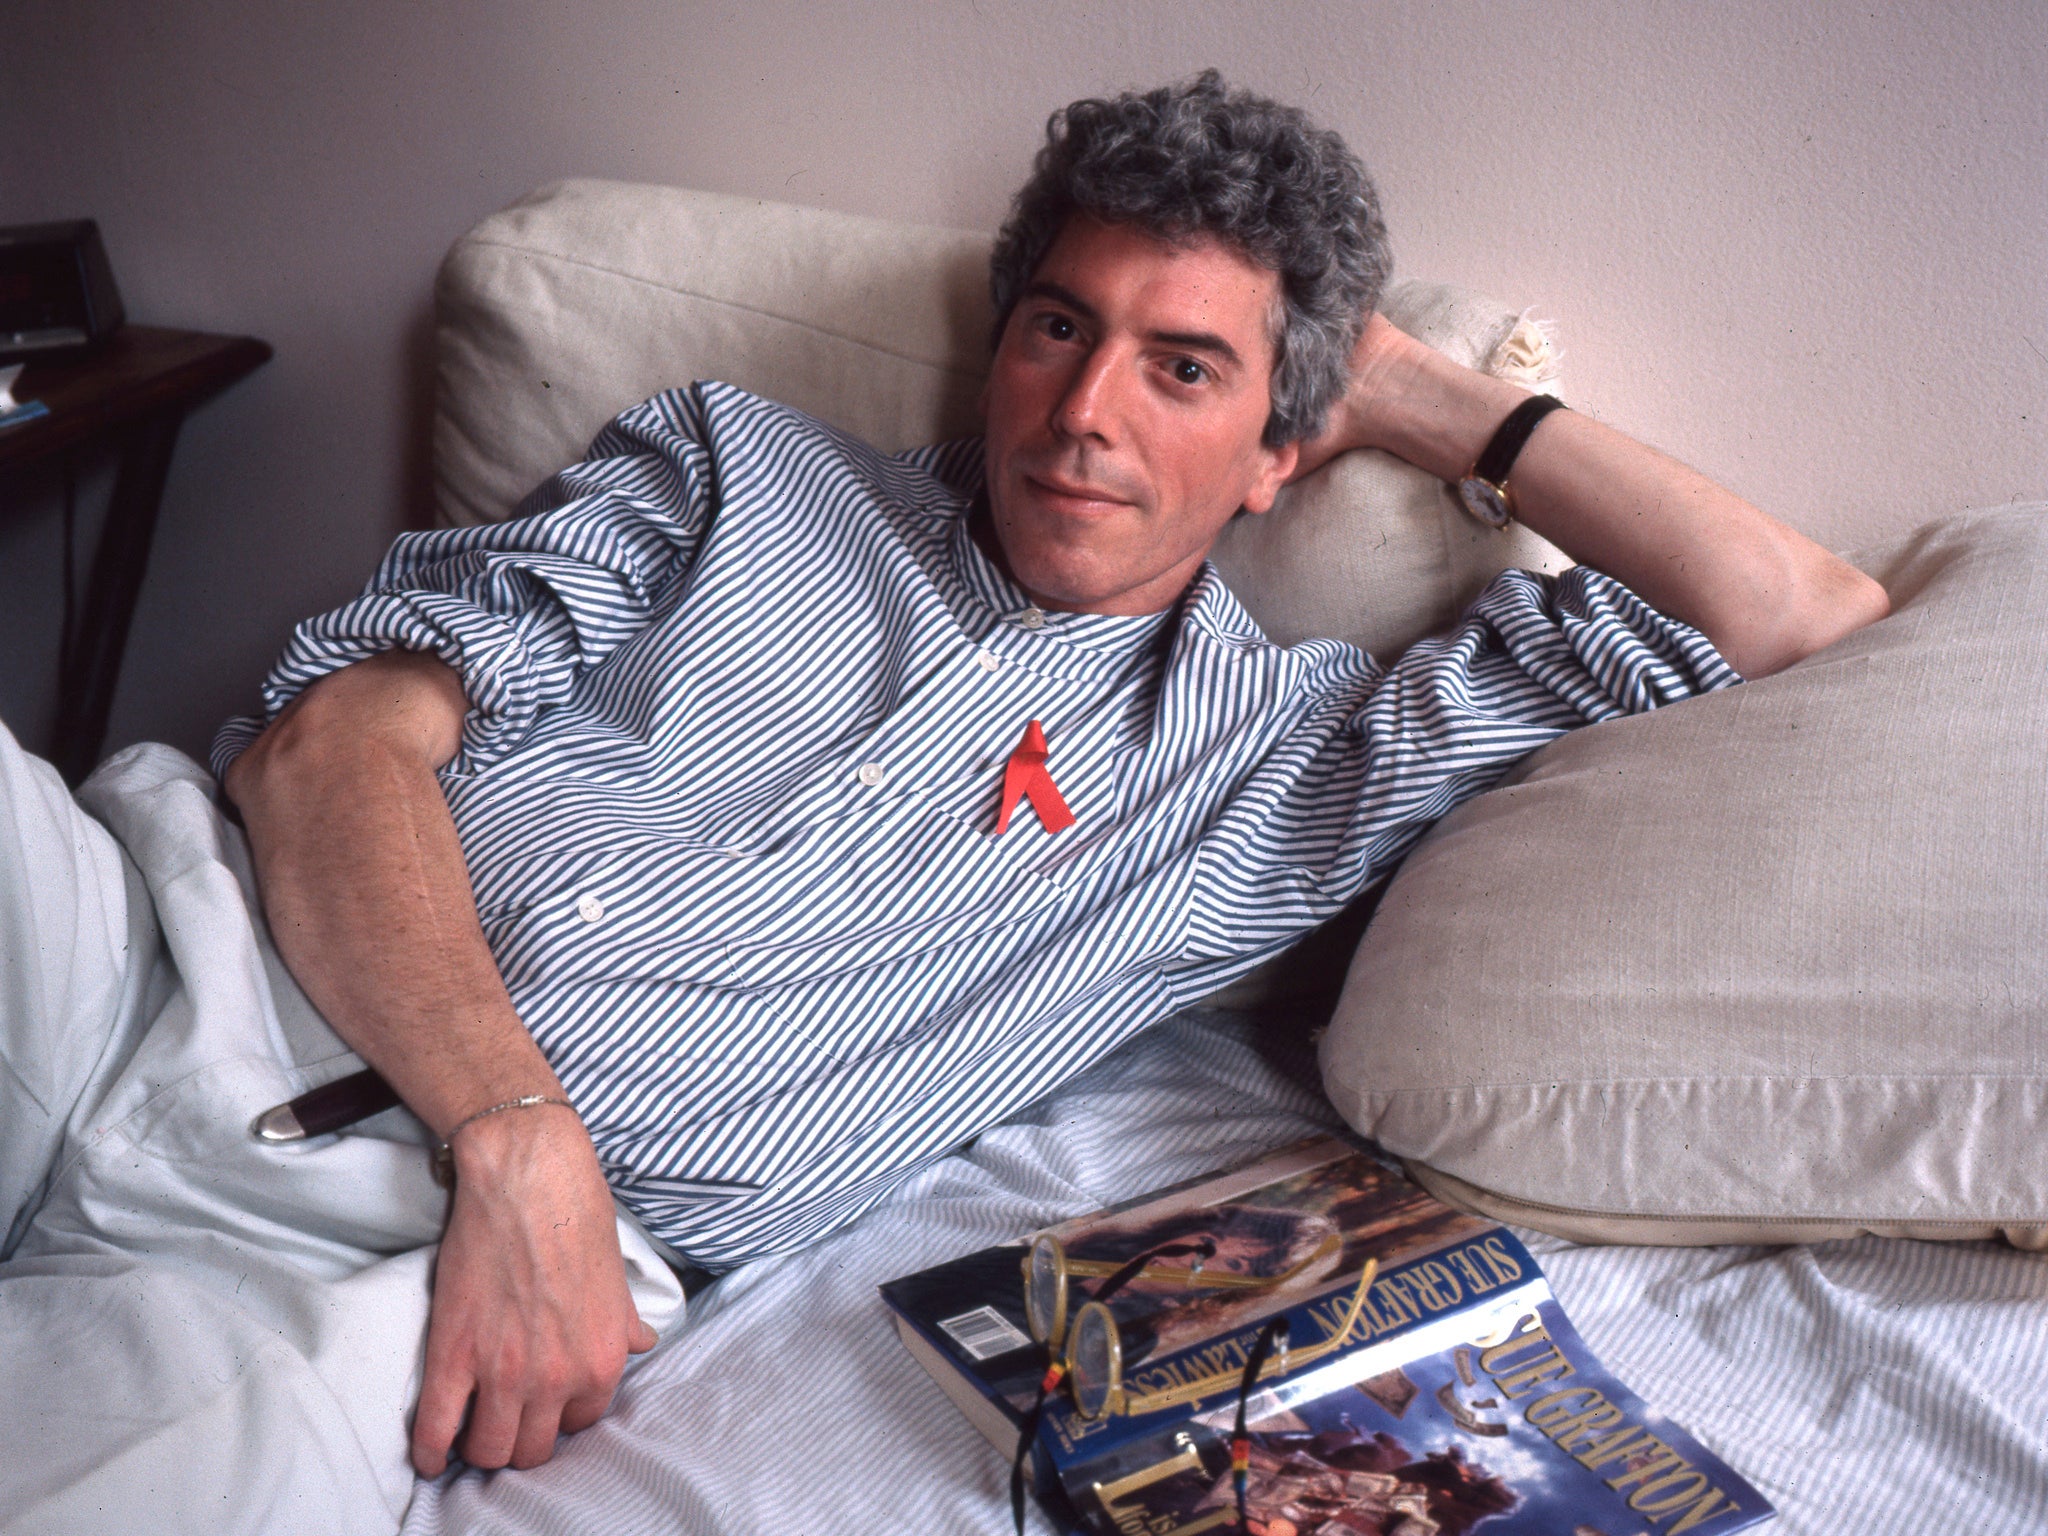 O’Connell died of complications from Aids after almost 40 years of living with the disease